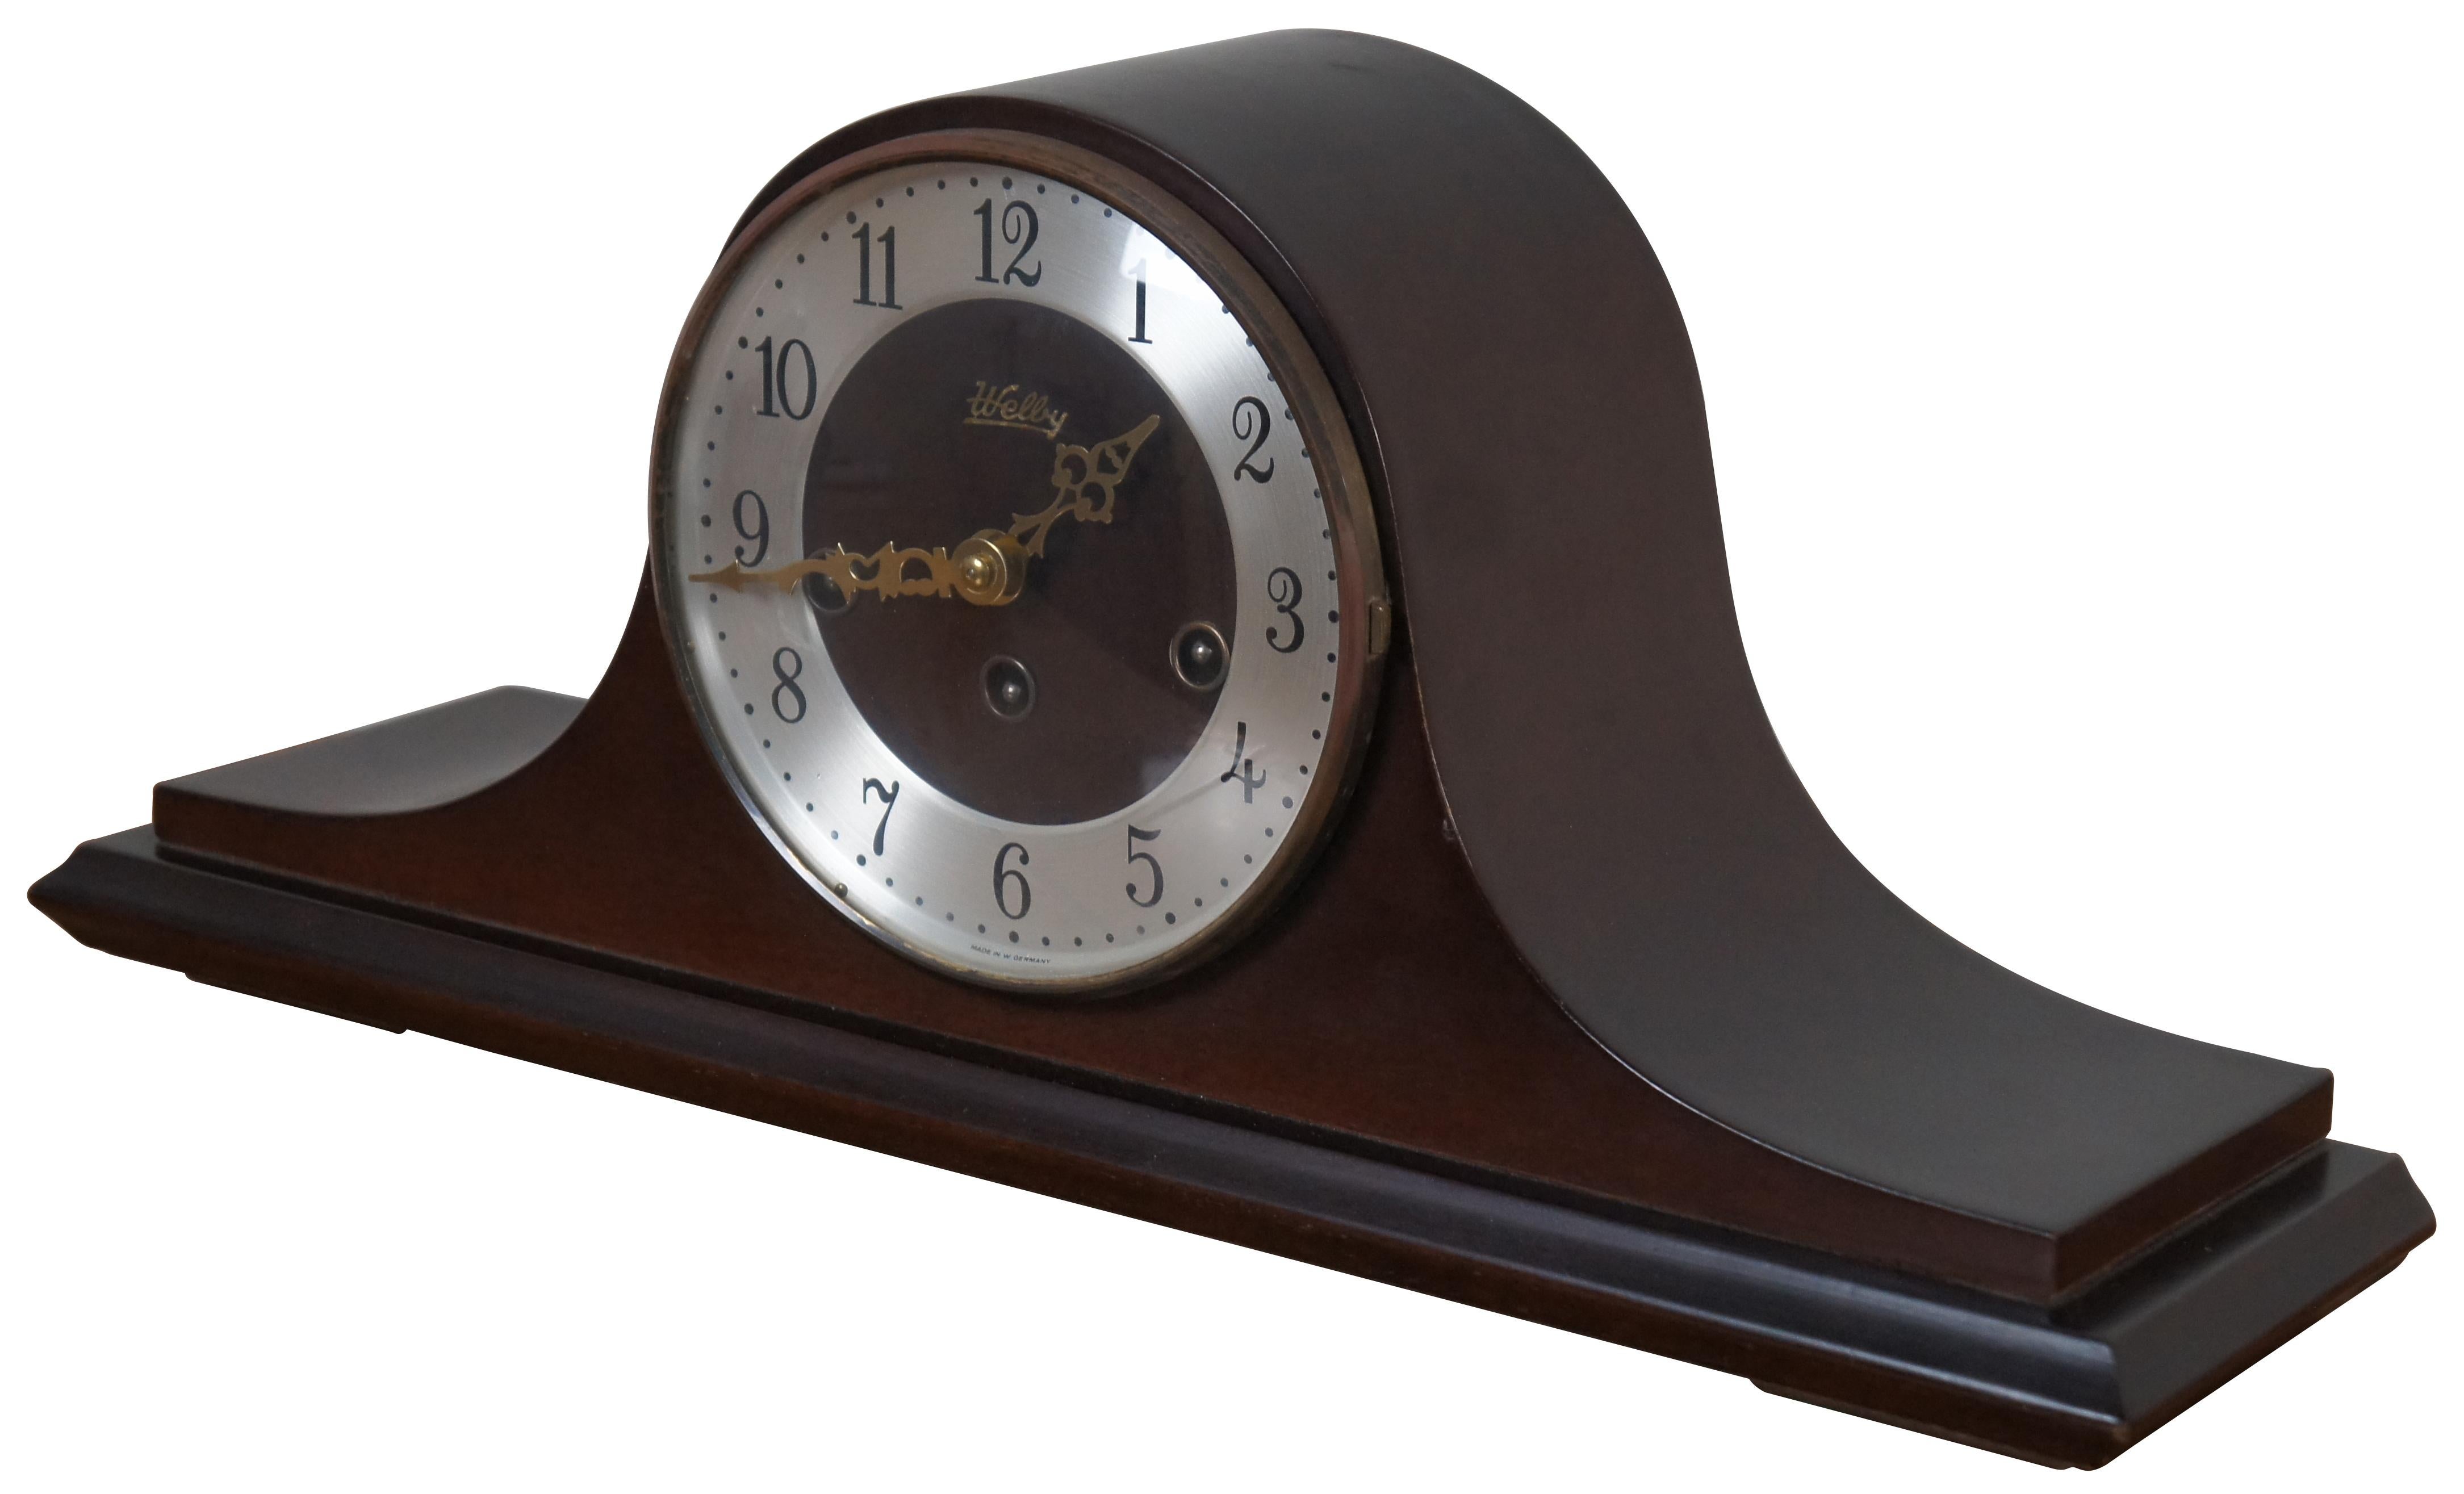 Vintage mahogany humpback chiming mantel clock by Welby (a division of Elgin) with Franz Hermle Two Jewel Unadjusted works, number 340-020. Measure: 18